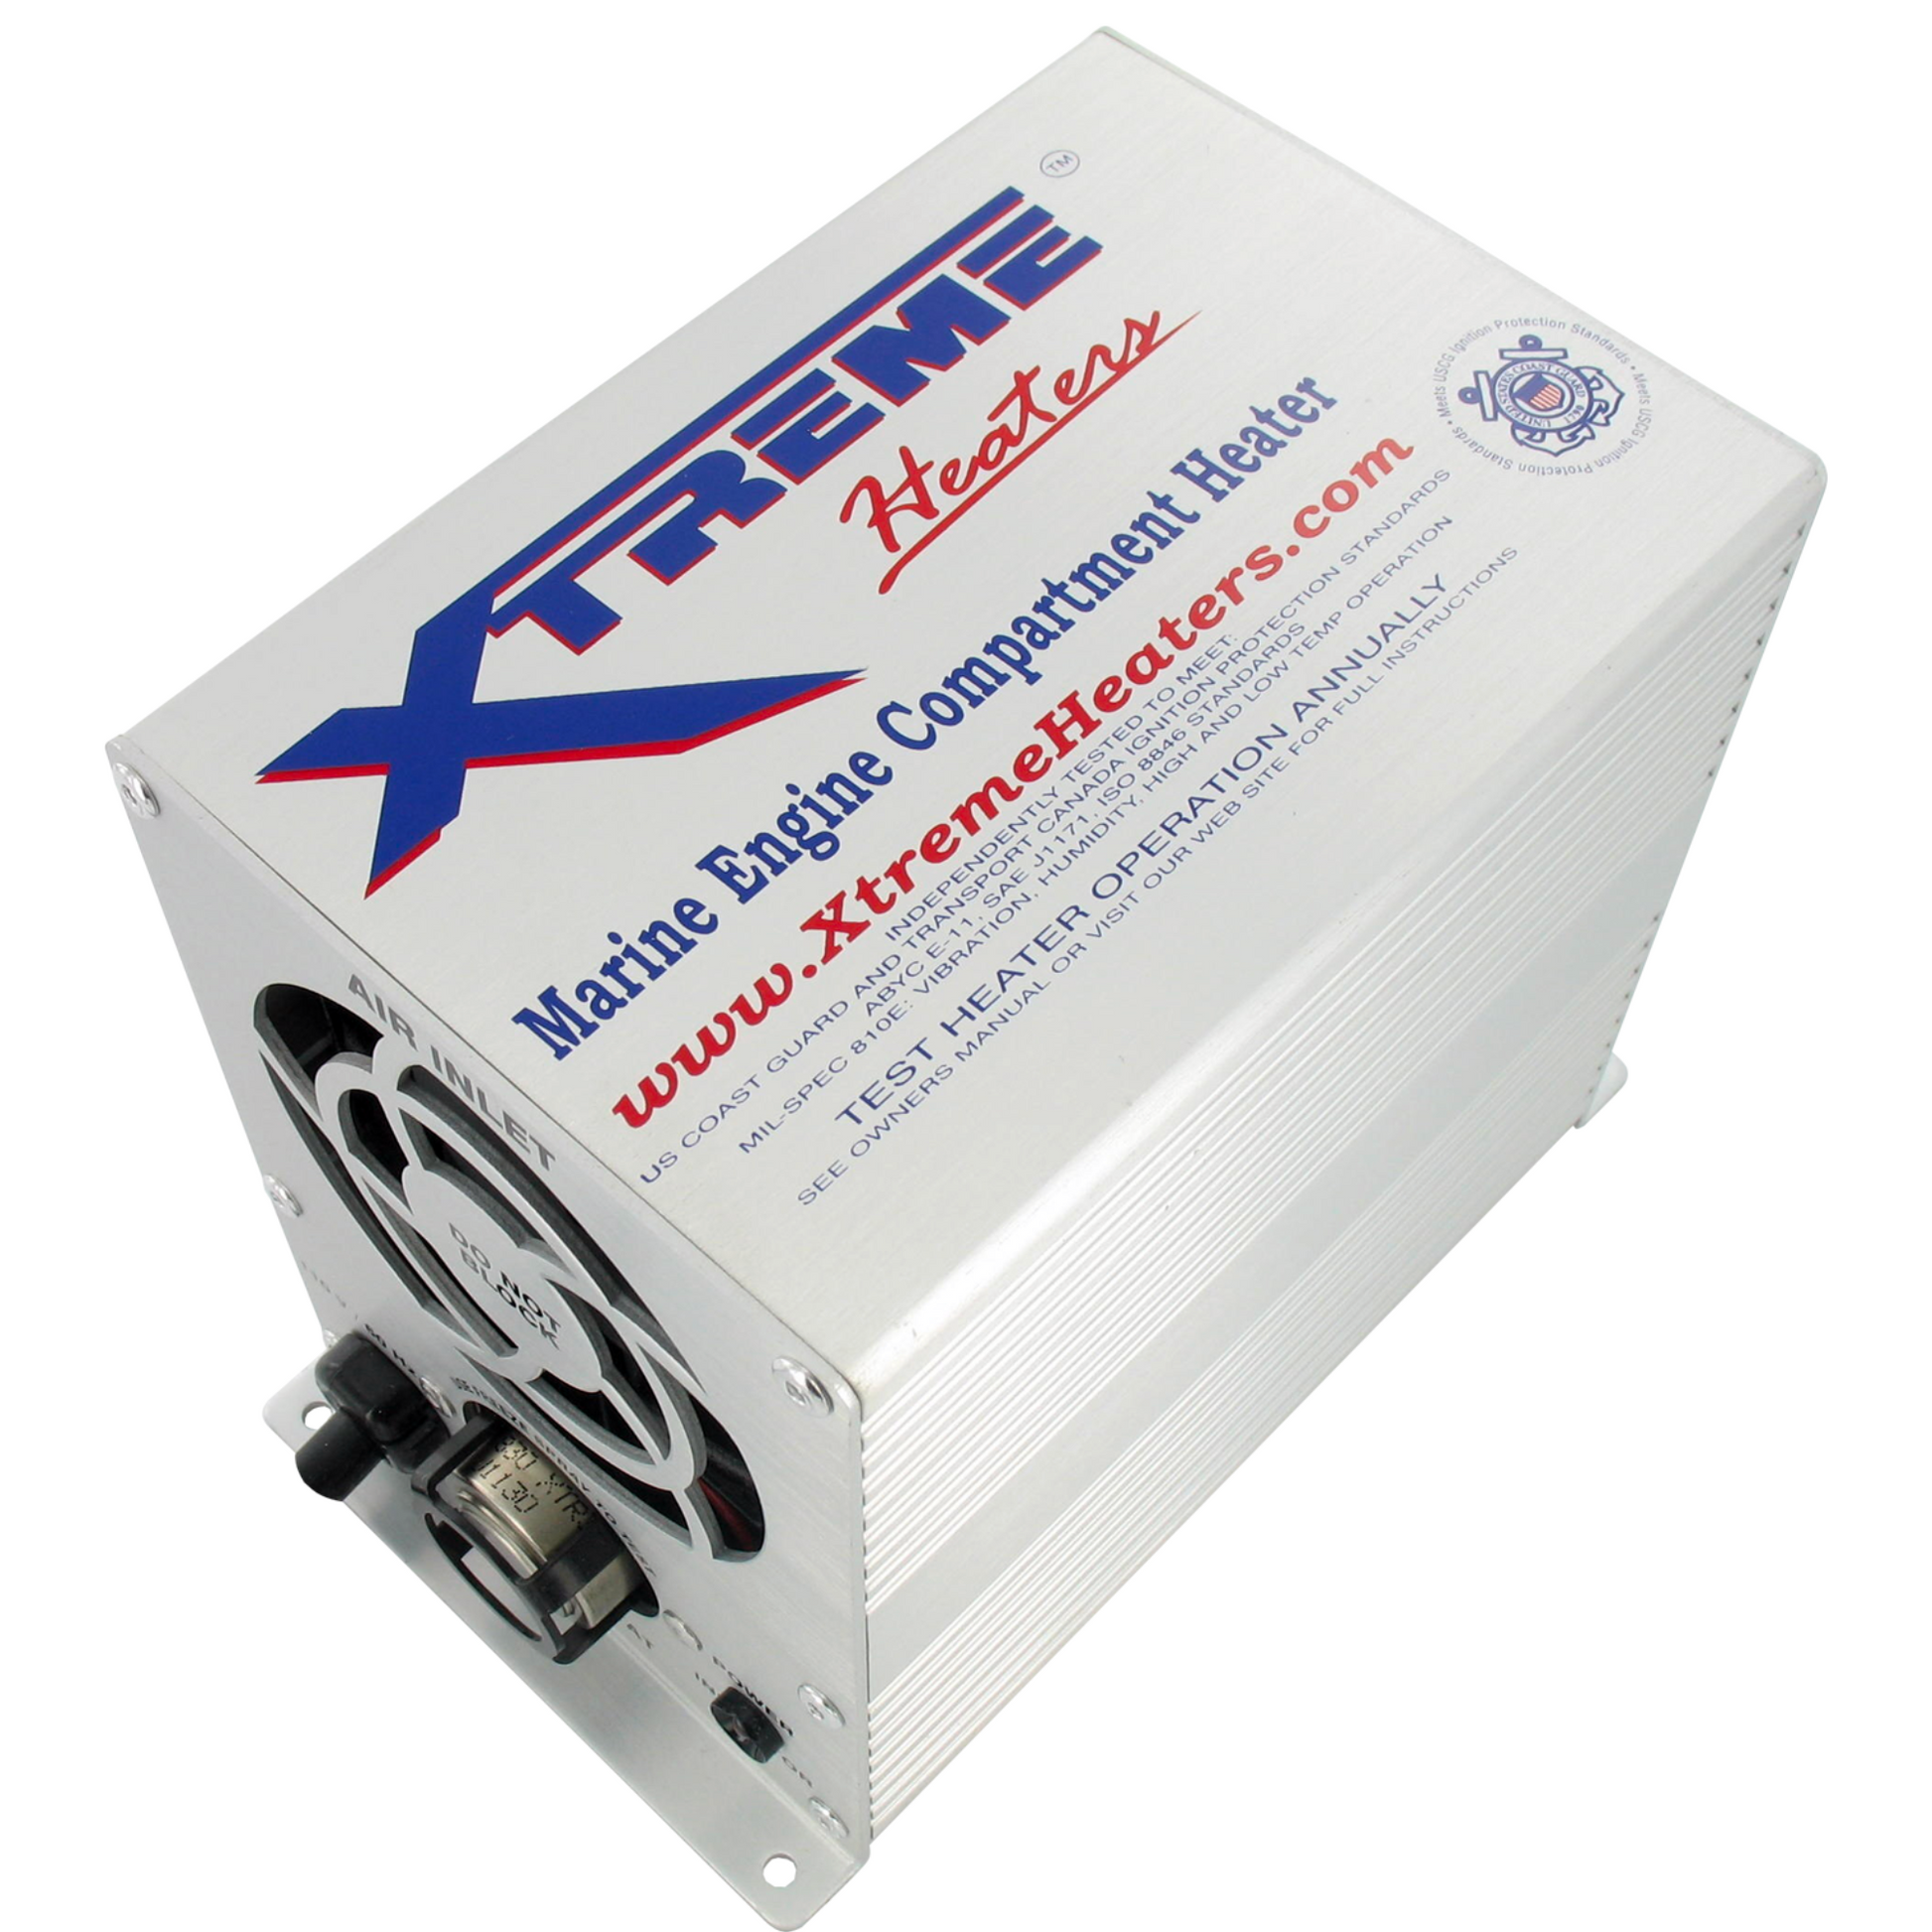 Xtreme Heater Small Top View (Older Model)